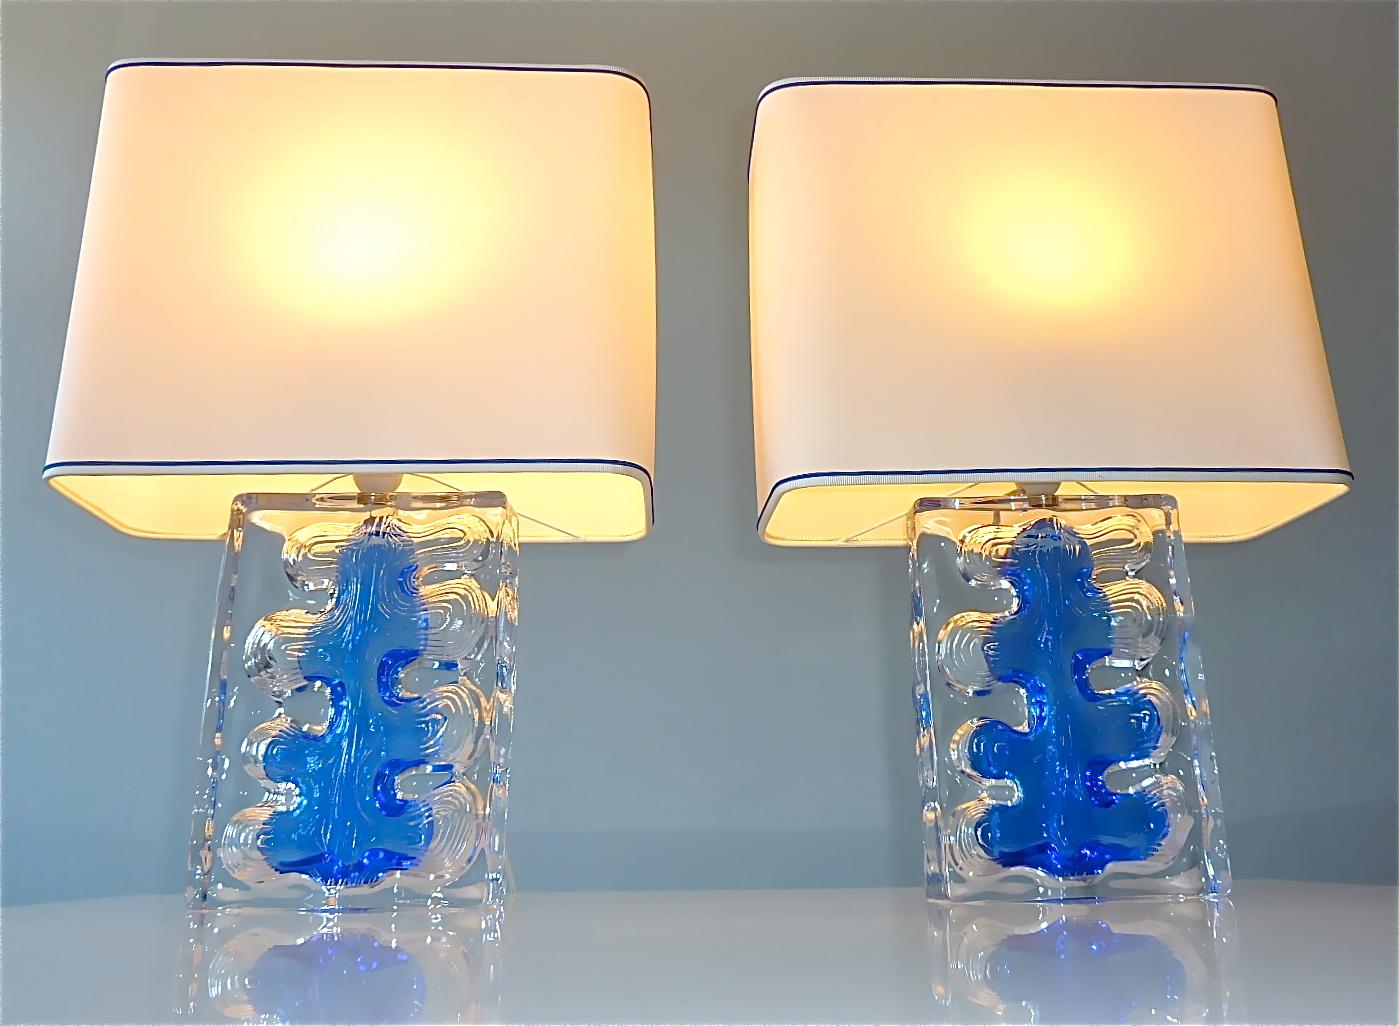 Rare pair of high quality and high end French table lamps signed Daum France around 1970s. The heavy midcentury lamp bases are made of clear crystal glass combined with ocean blue tinted glass with an abstract brutalist style decor. The lamps come